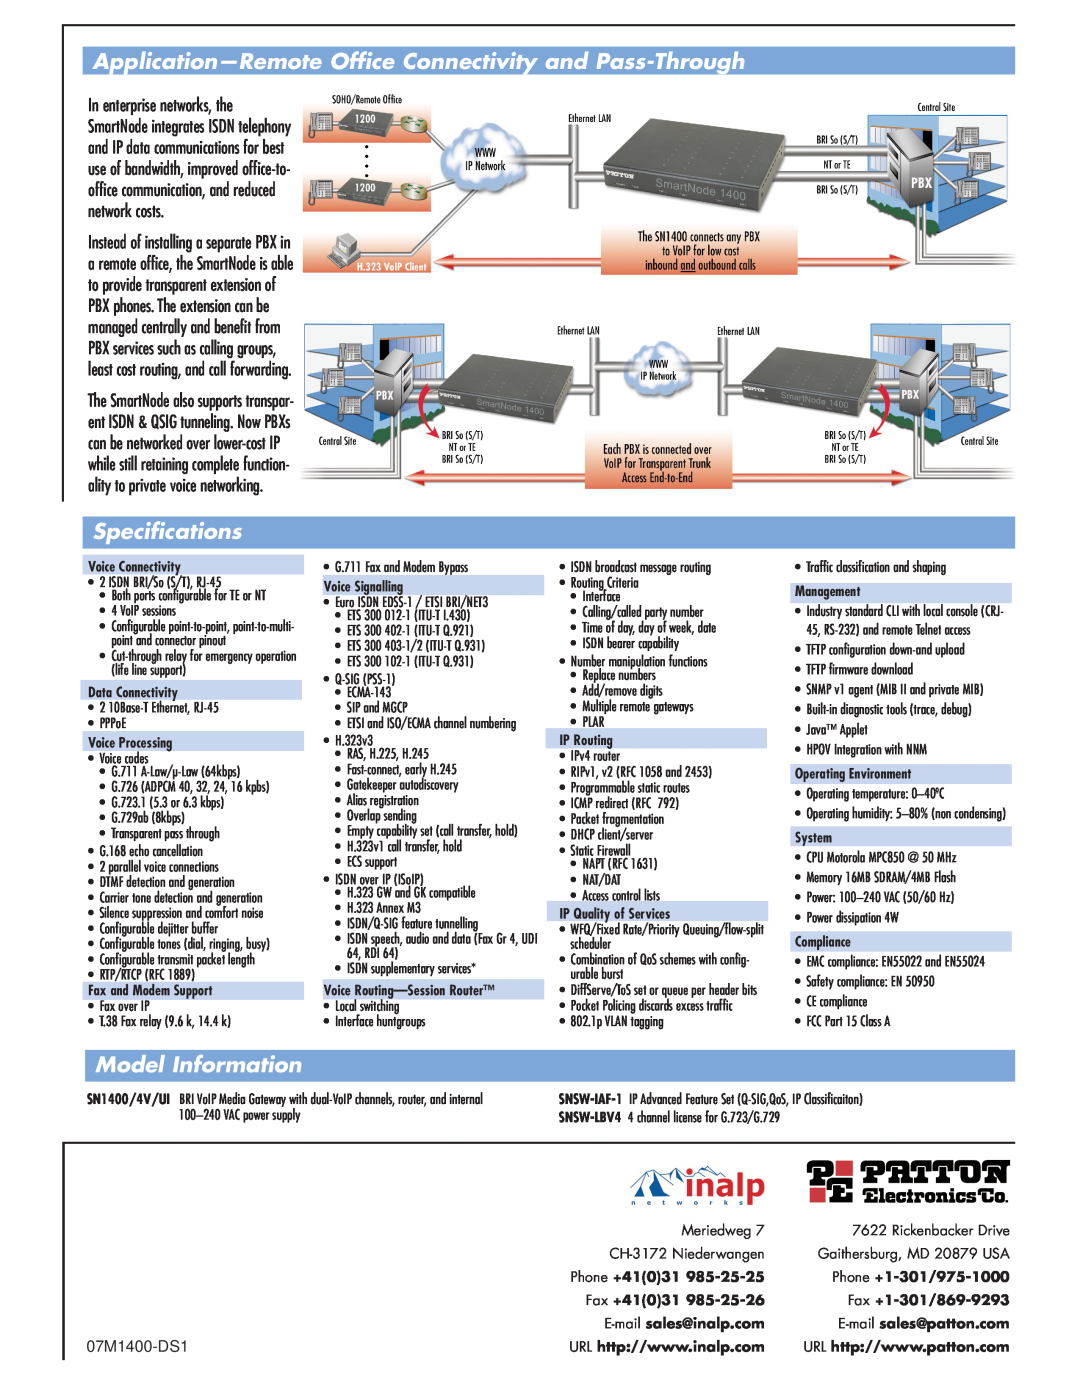 Patton electronic 1400 Series Application-Remote Office Connectivity and Pass-Through, Specifications, Model Information 